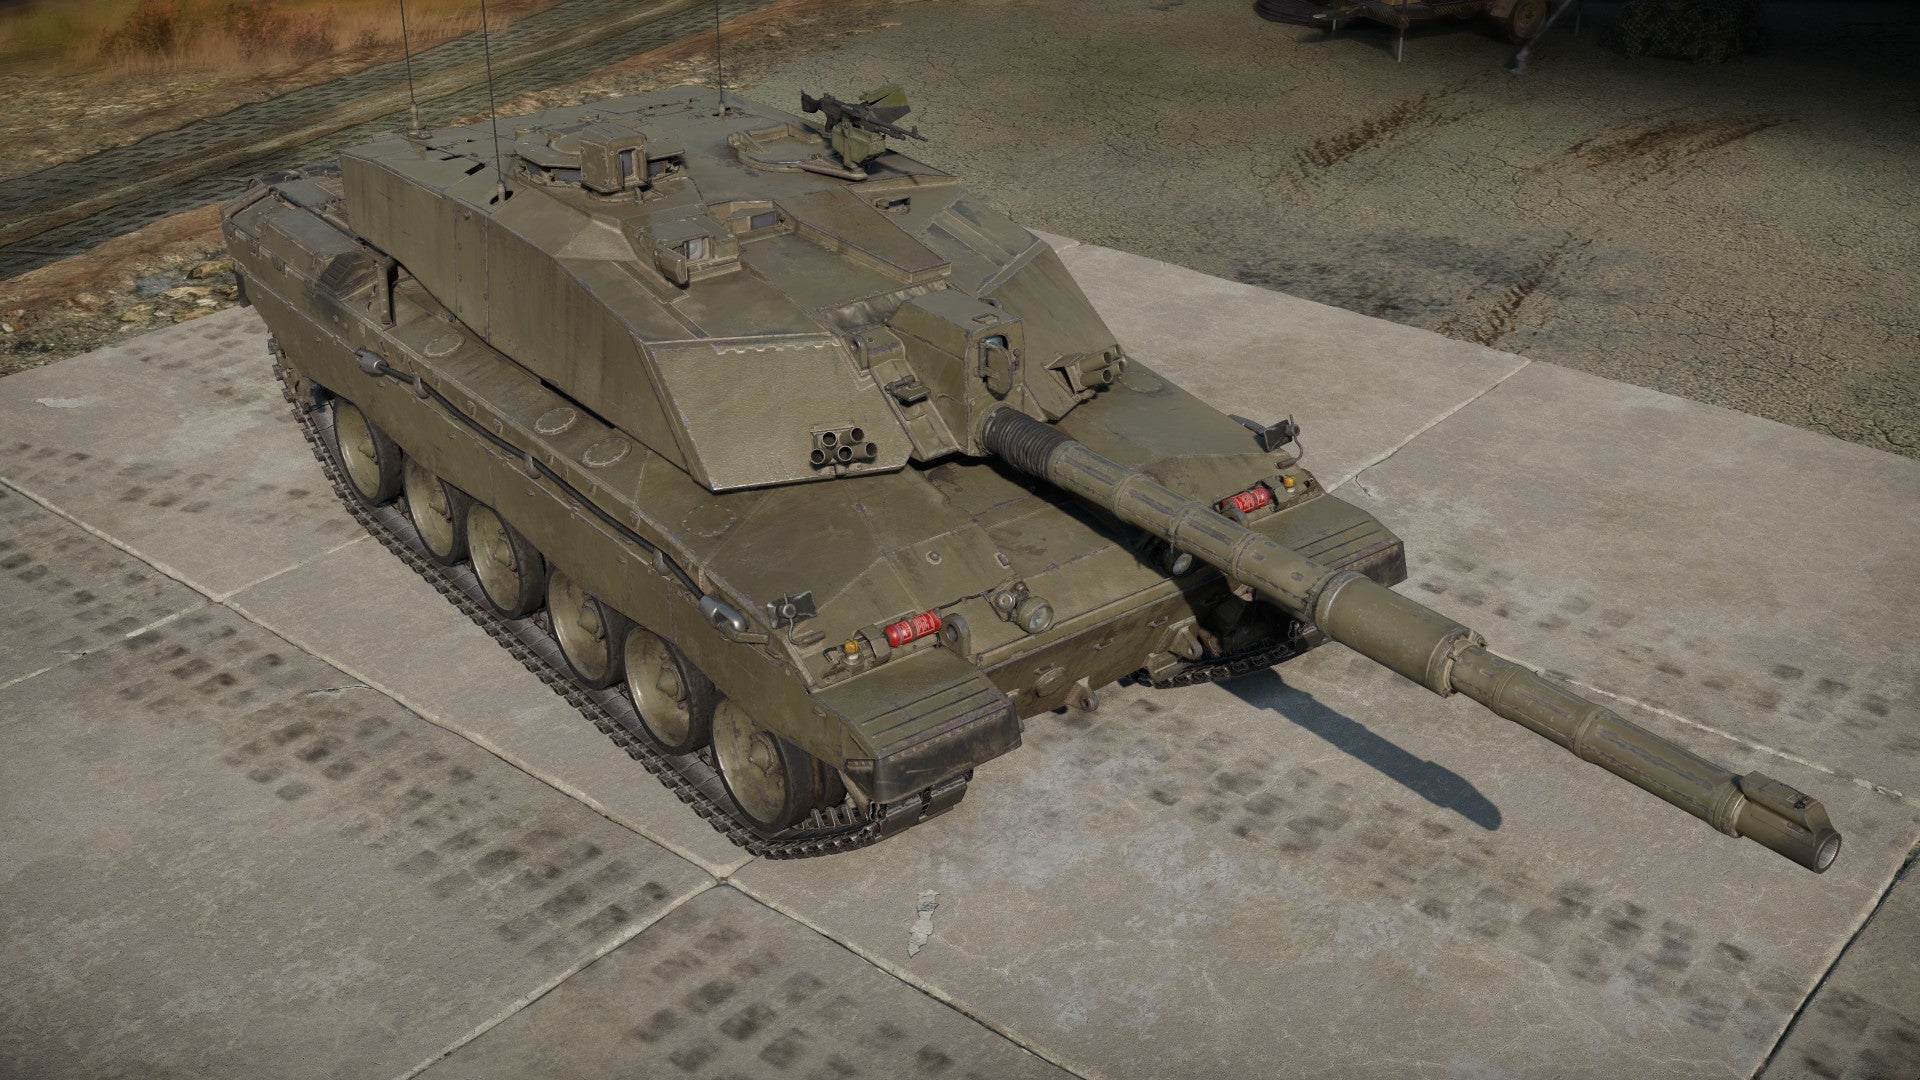 War Thunder player posts classified document to prove tank is inaccurate - Rock Paper Shotgun